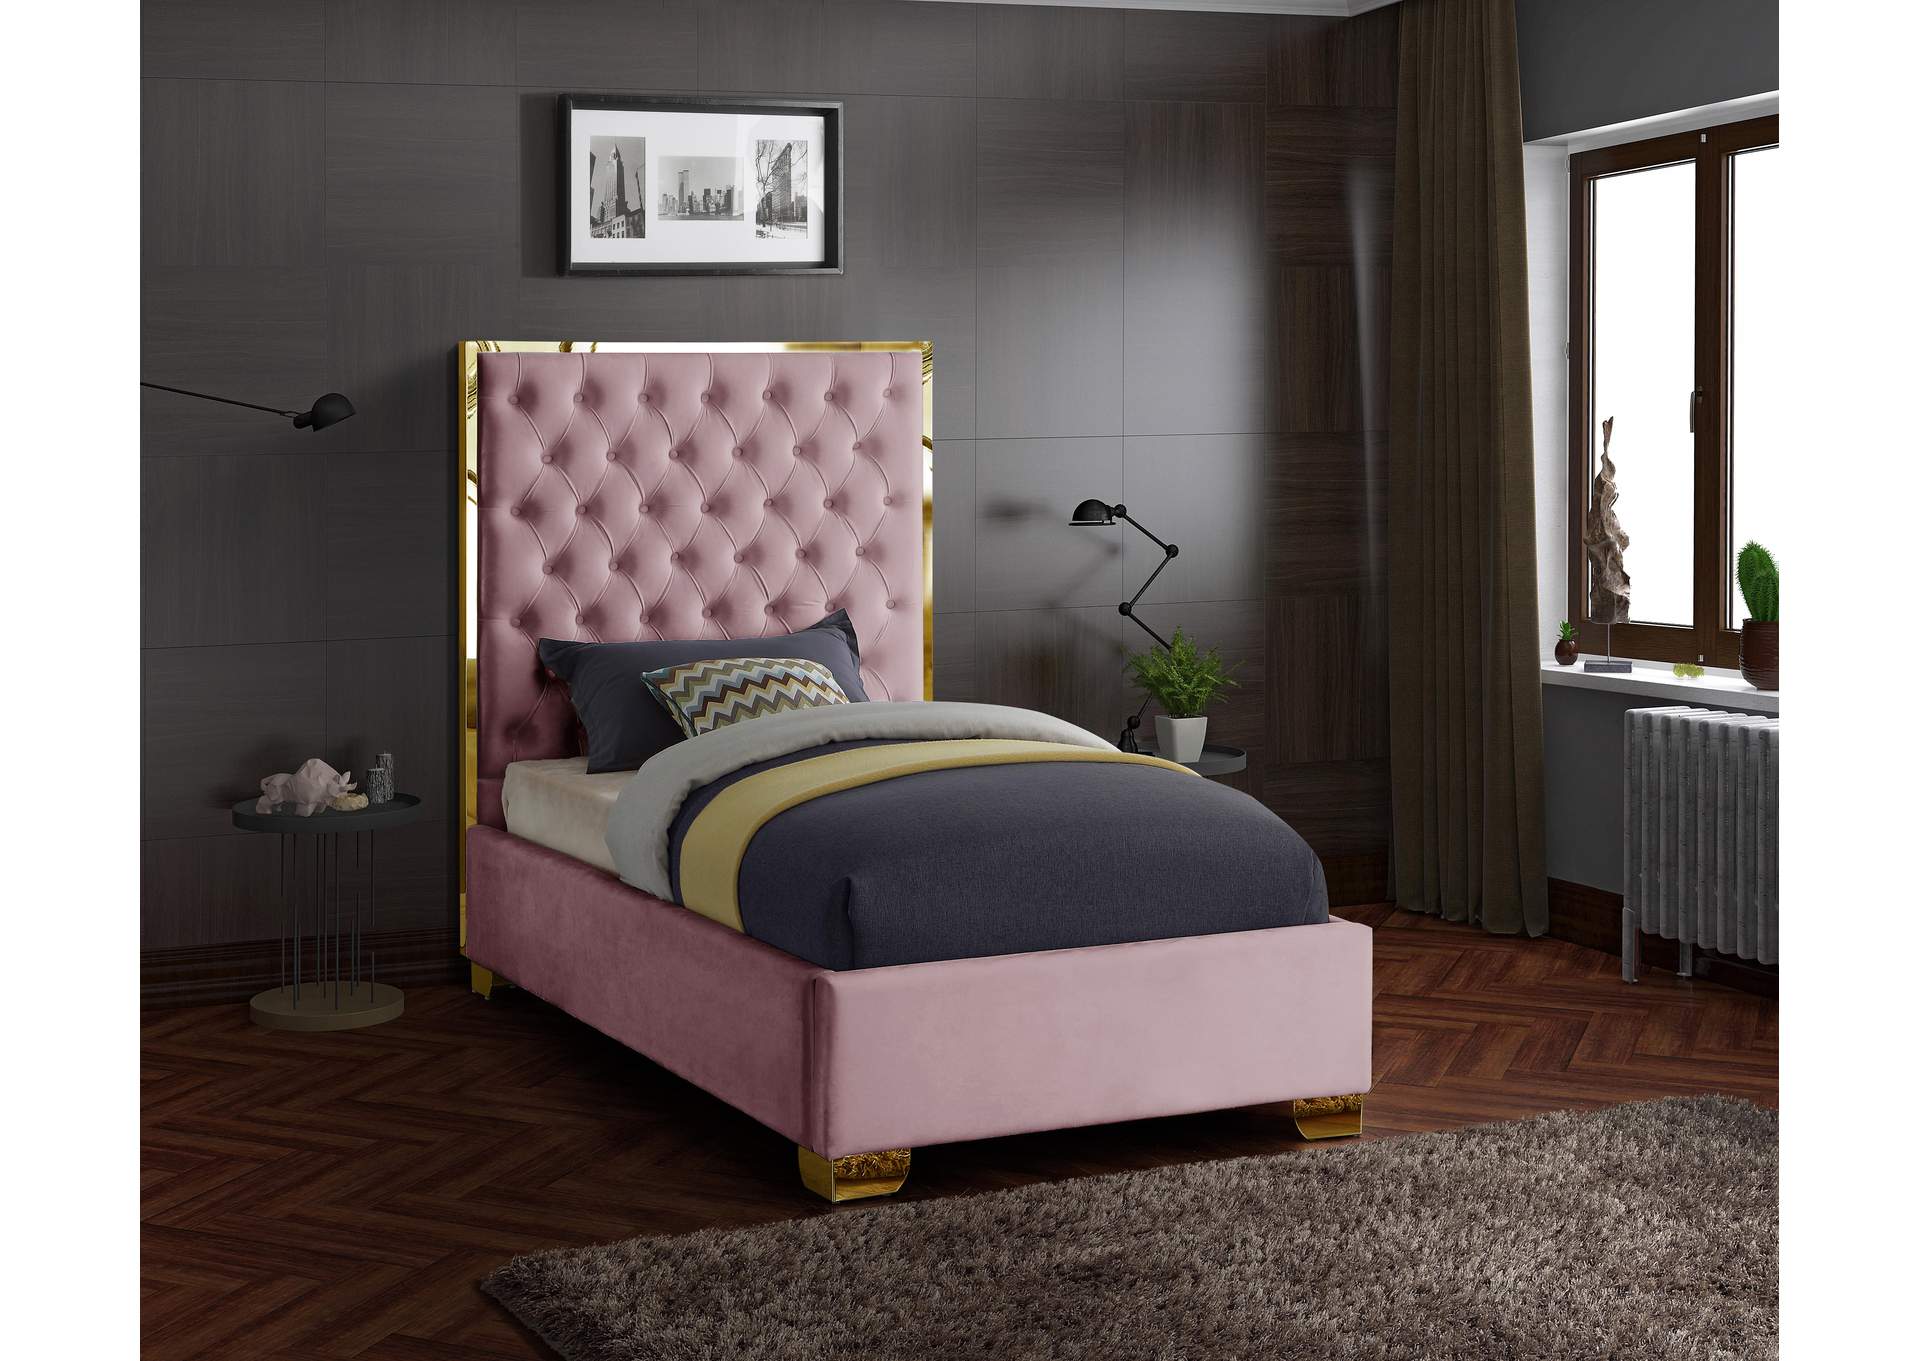 Lana Pink Velvet Twin Bed Best, Pink Tufted Twin Bed